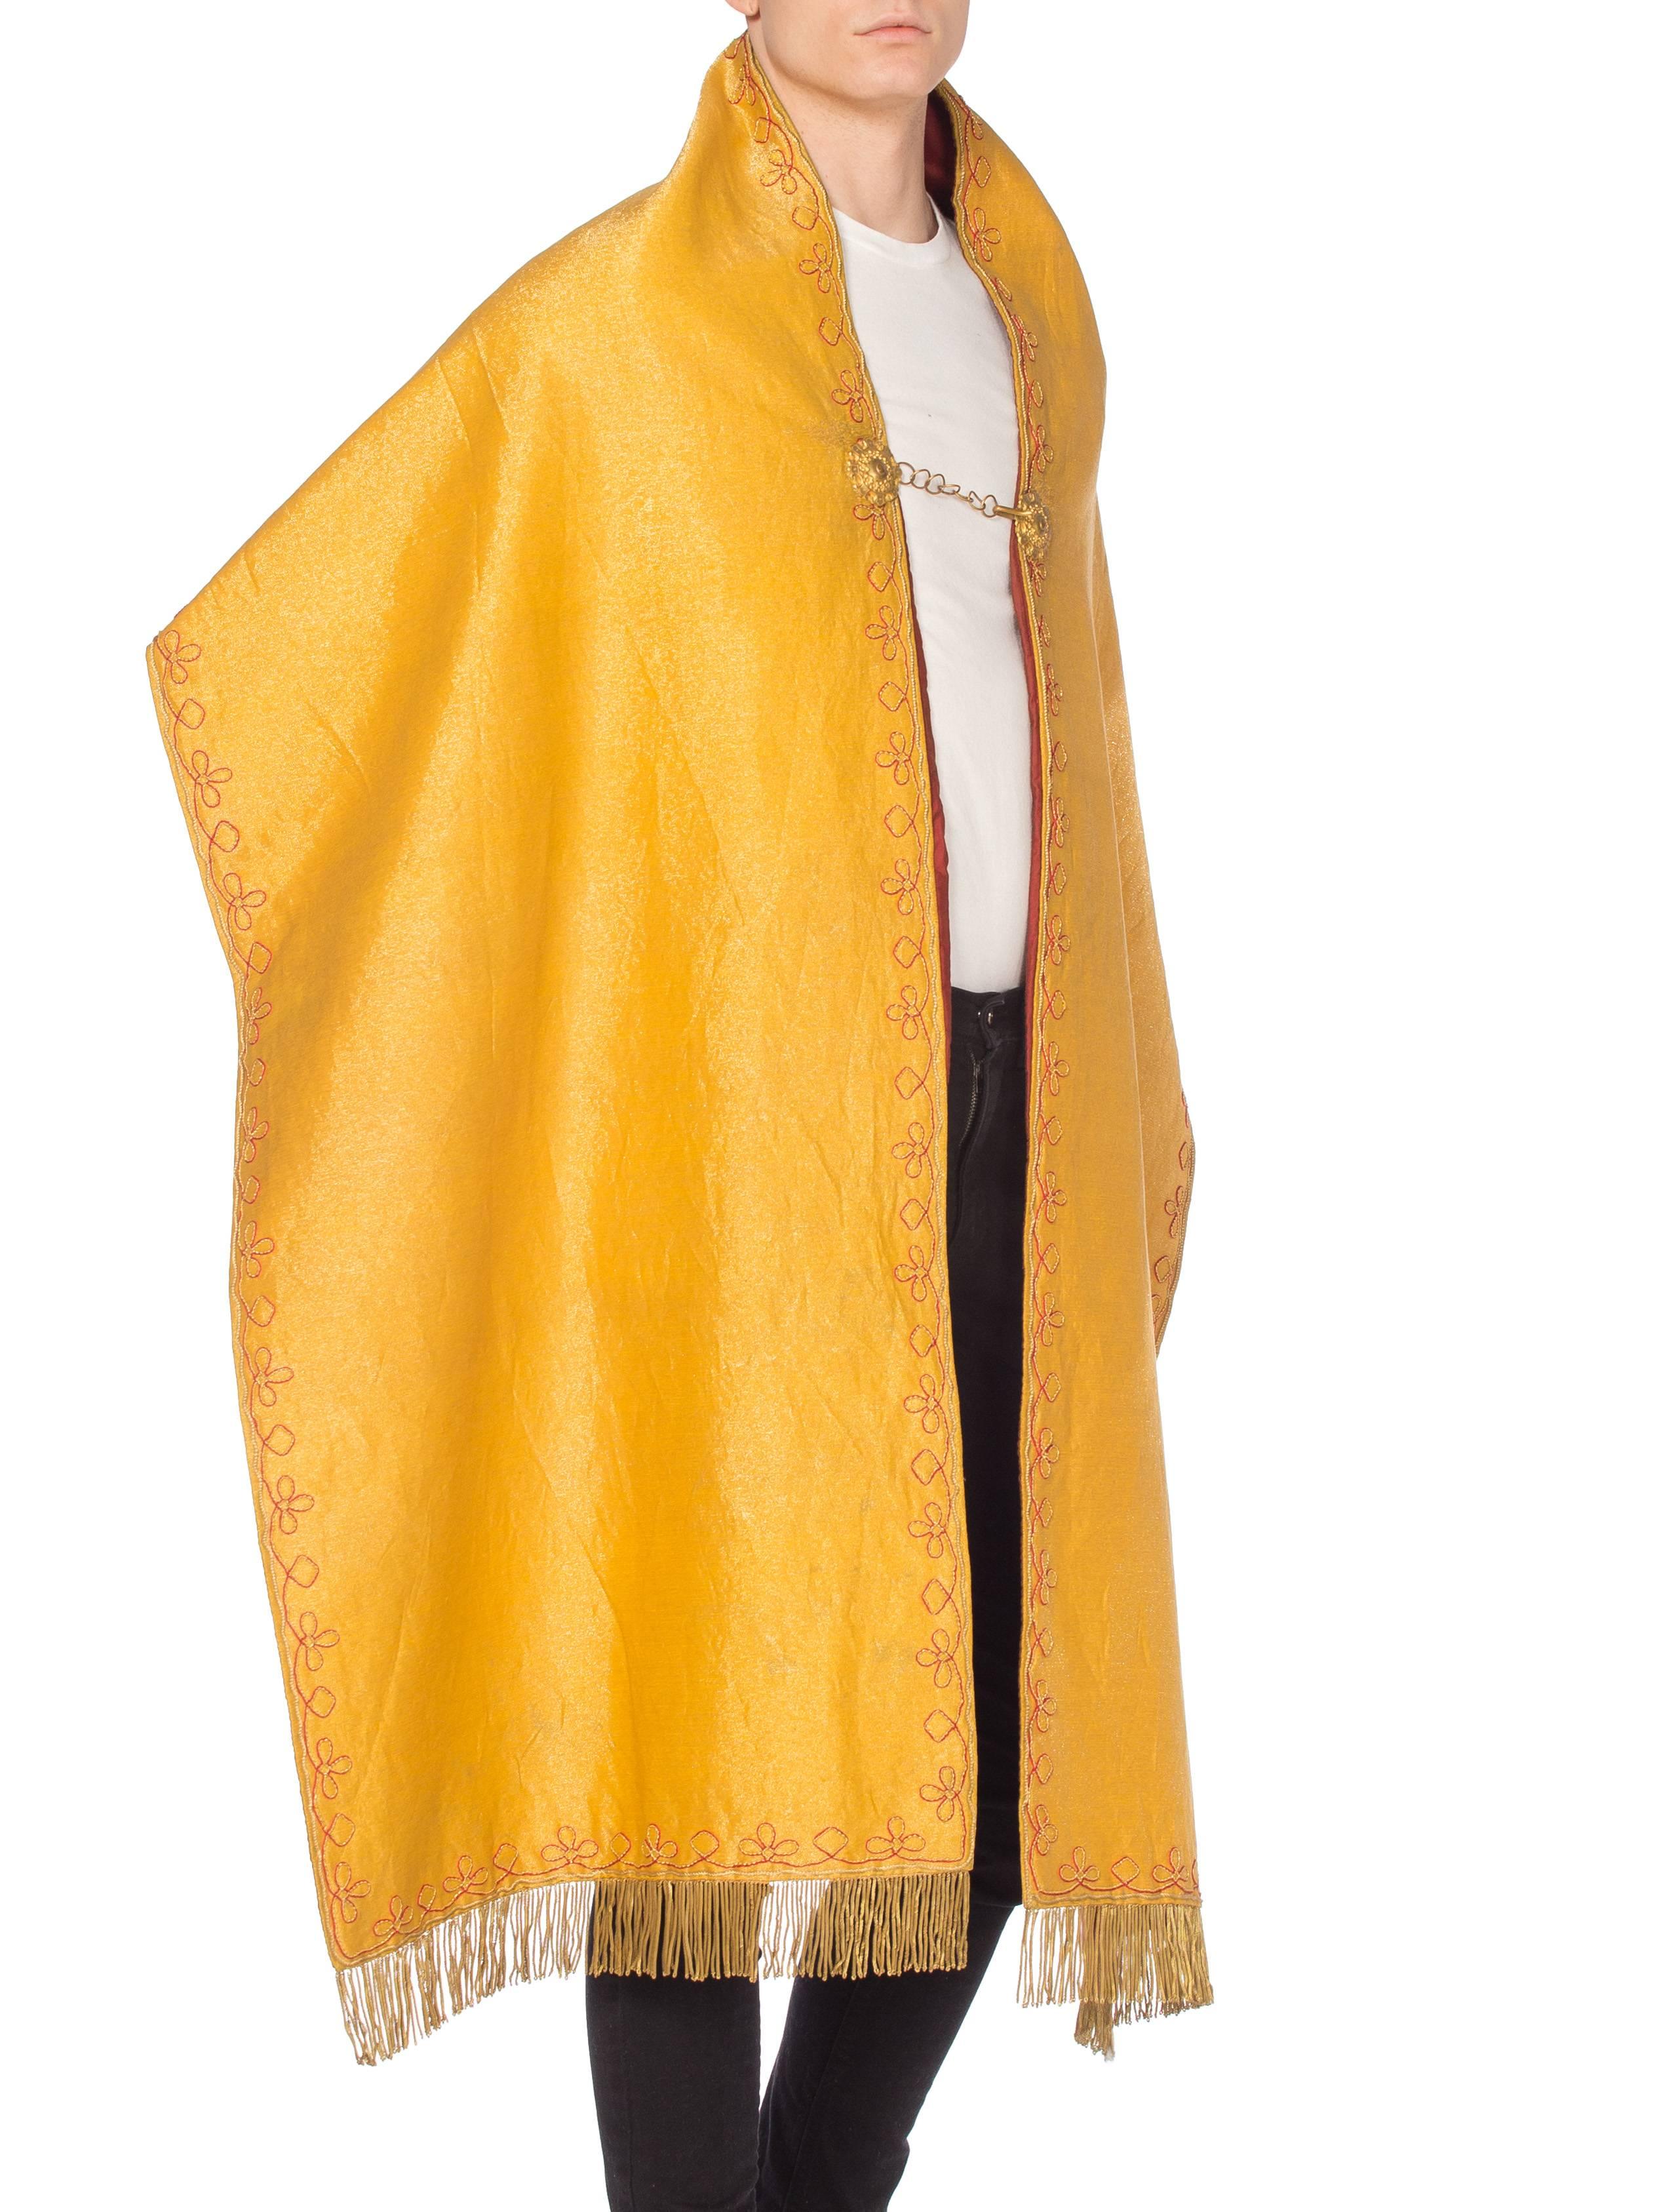 Women's or Men's Victorian Gold & Cotton Embroidered Catholic Mantle Cape With Fringe For Sale